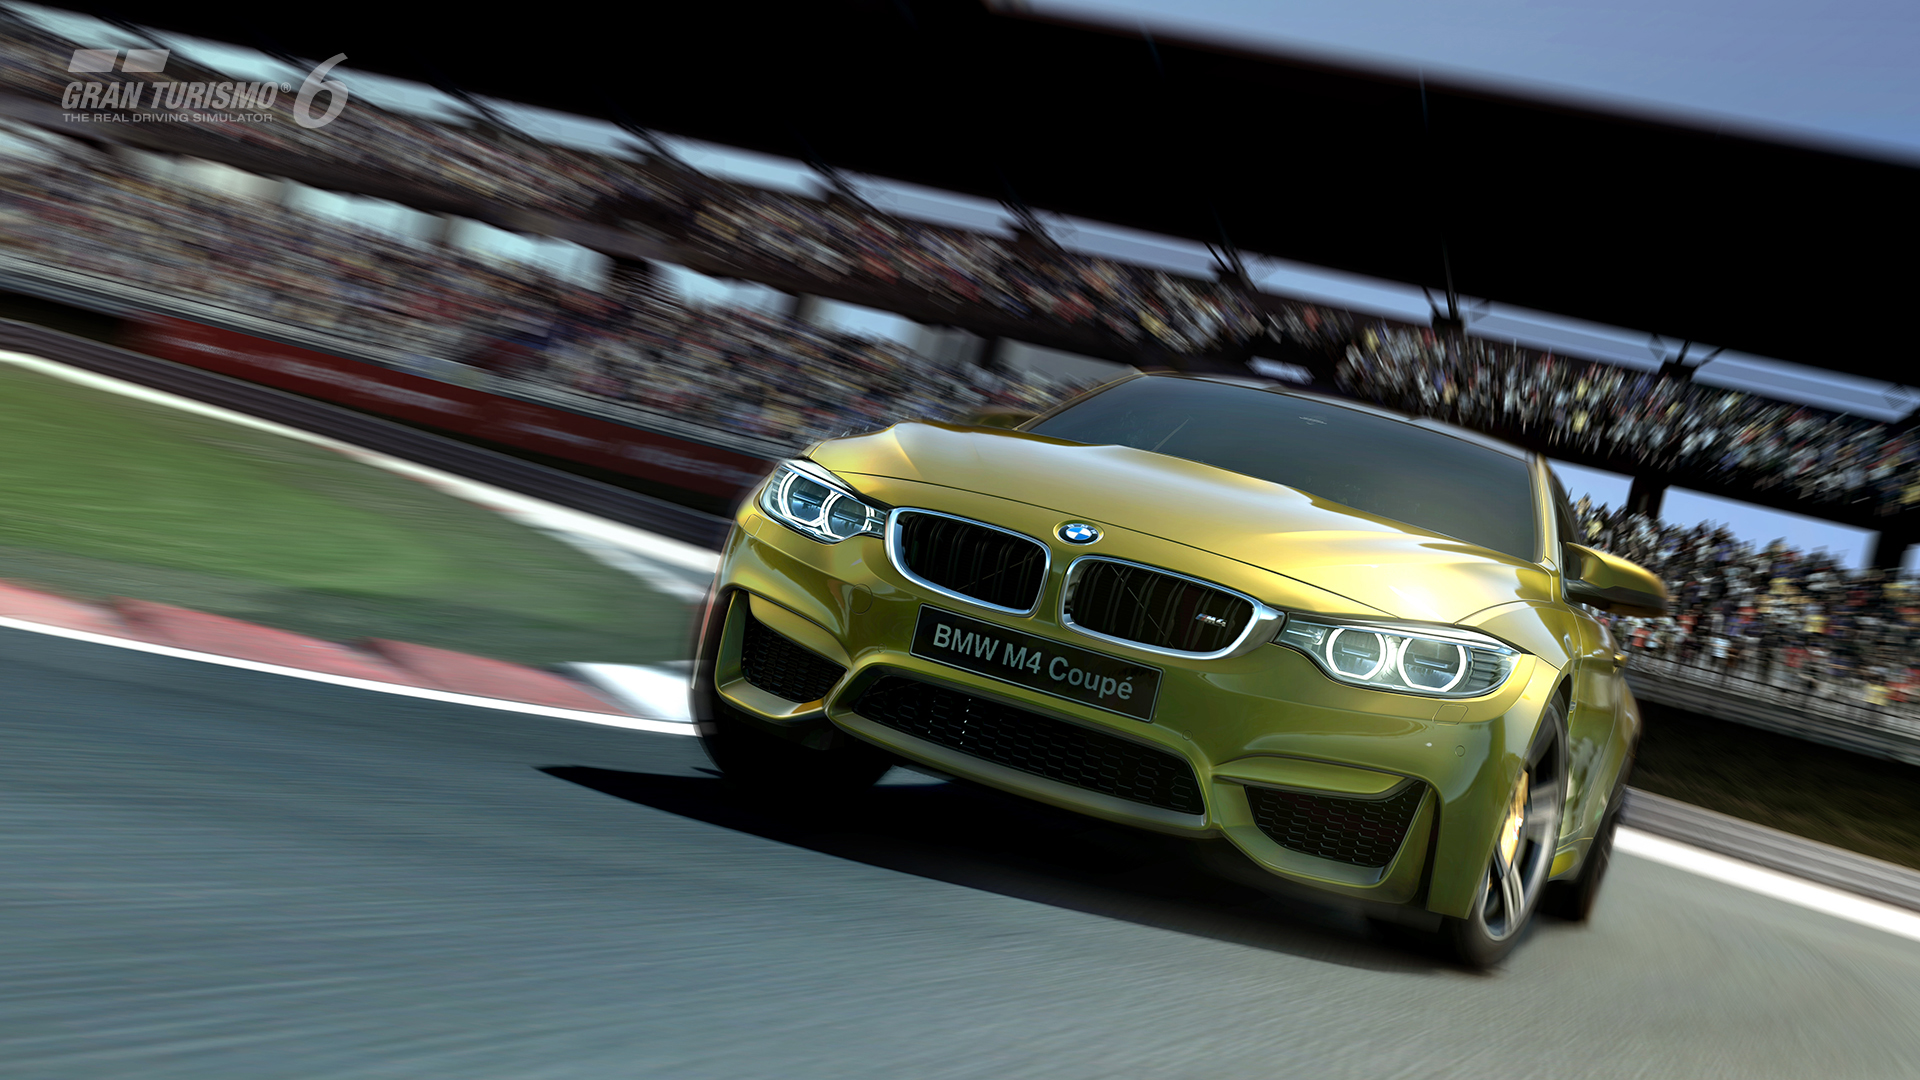 Gran Turismo 6 lets you drive the 2014 BMW M4 Coupe first